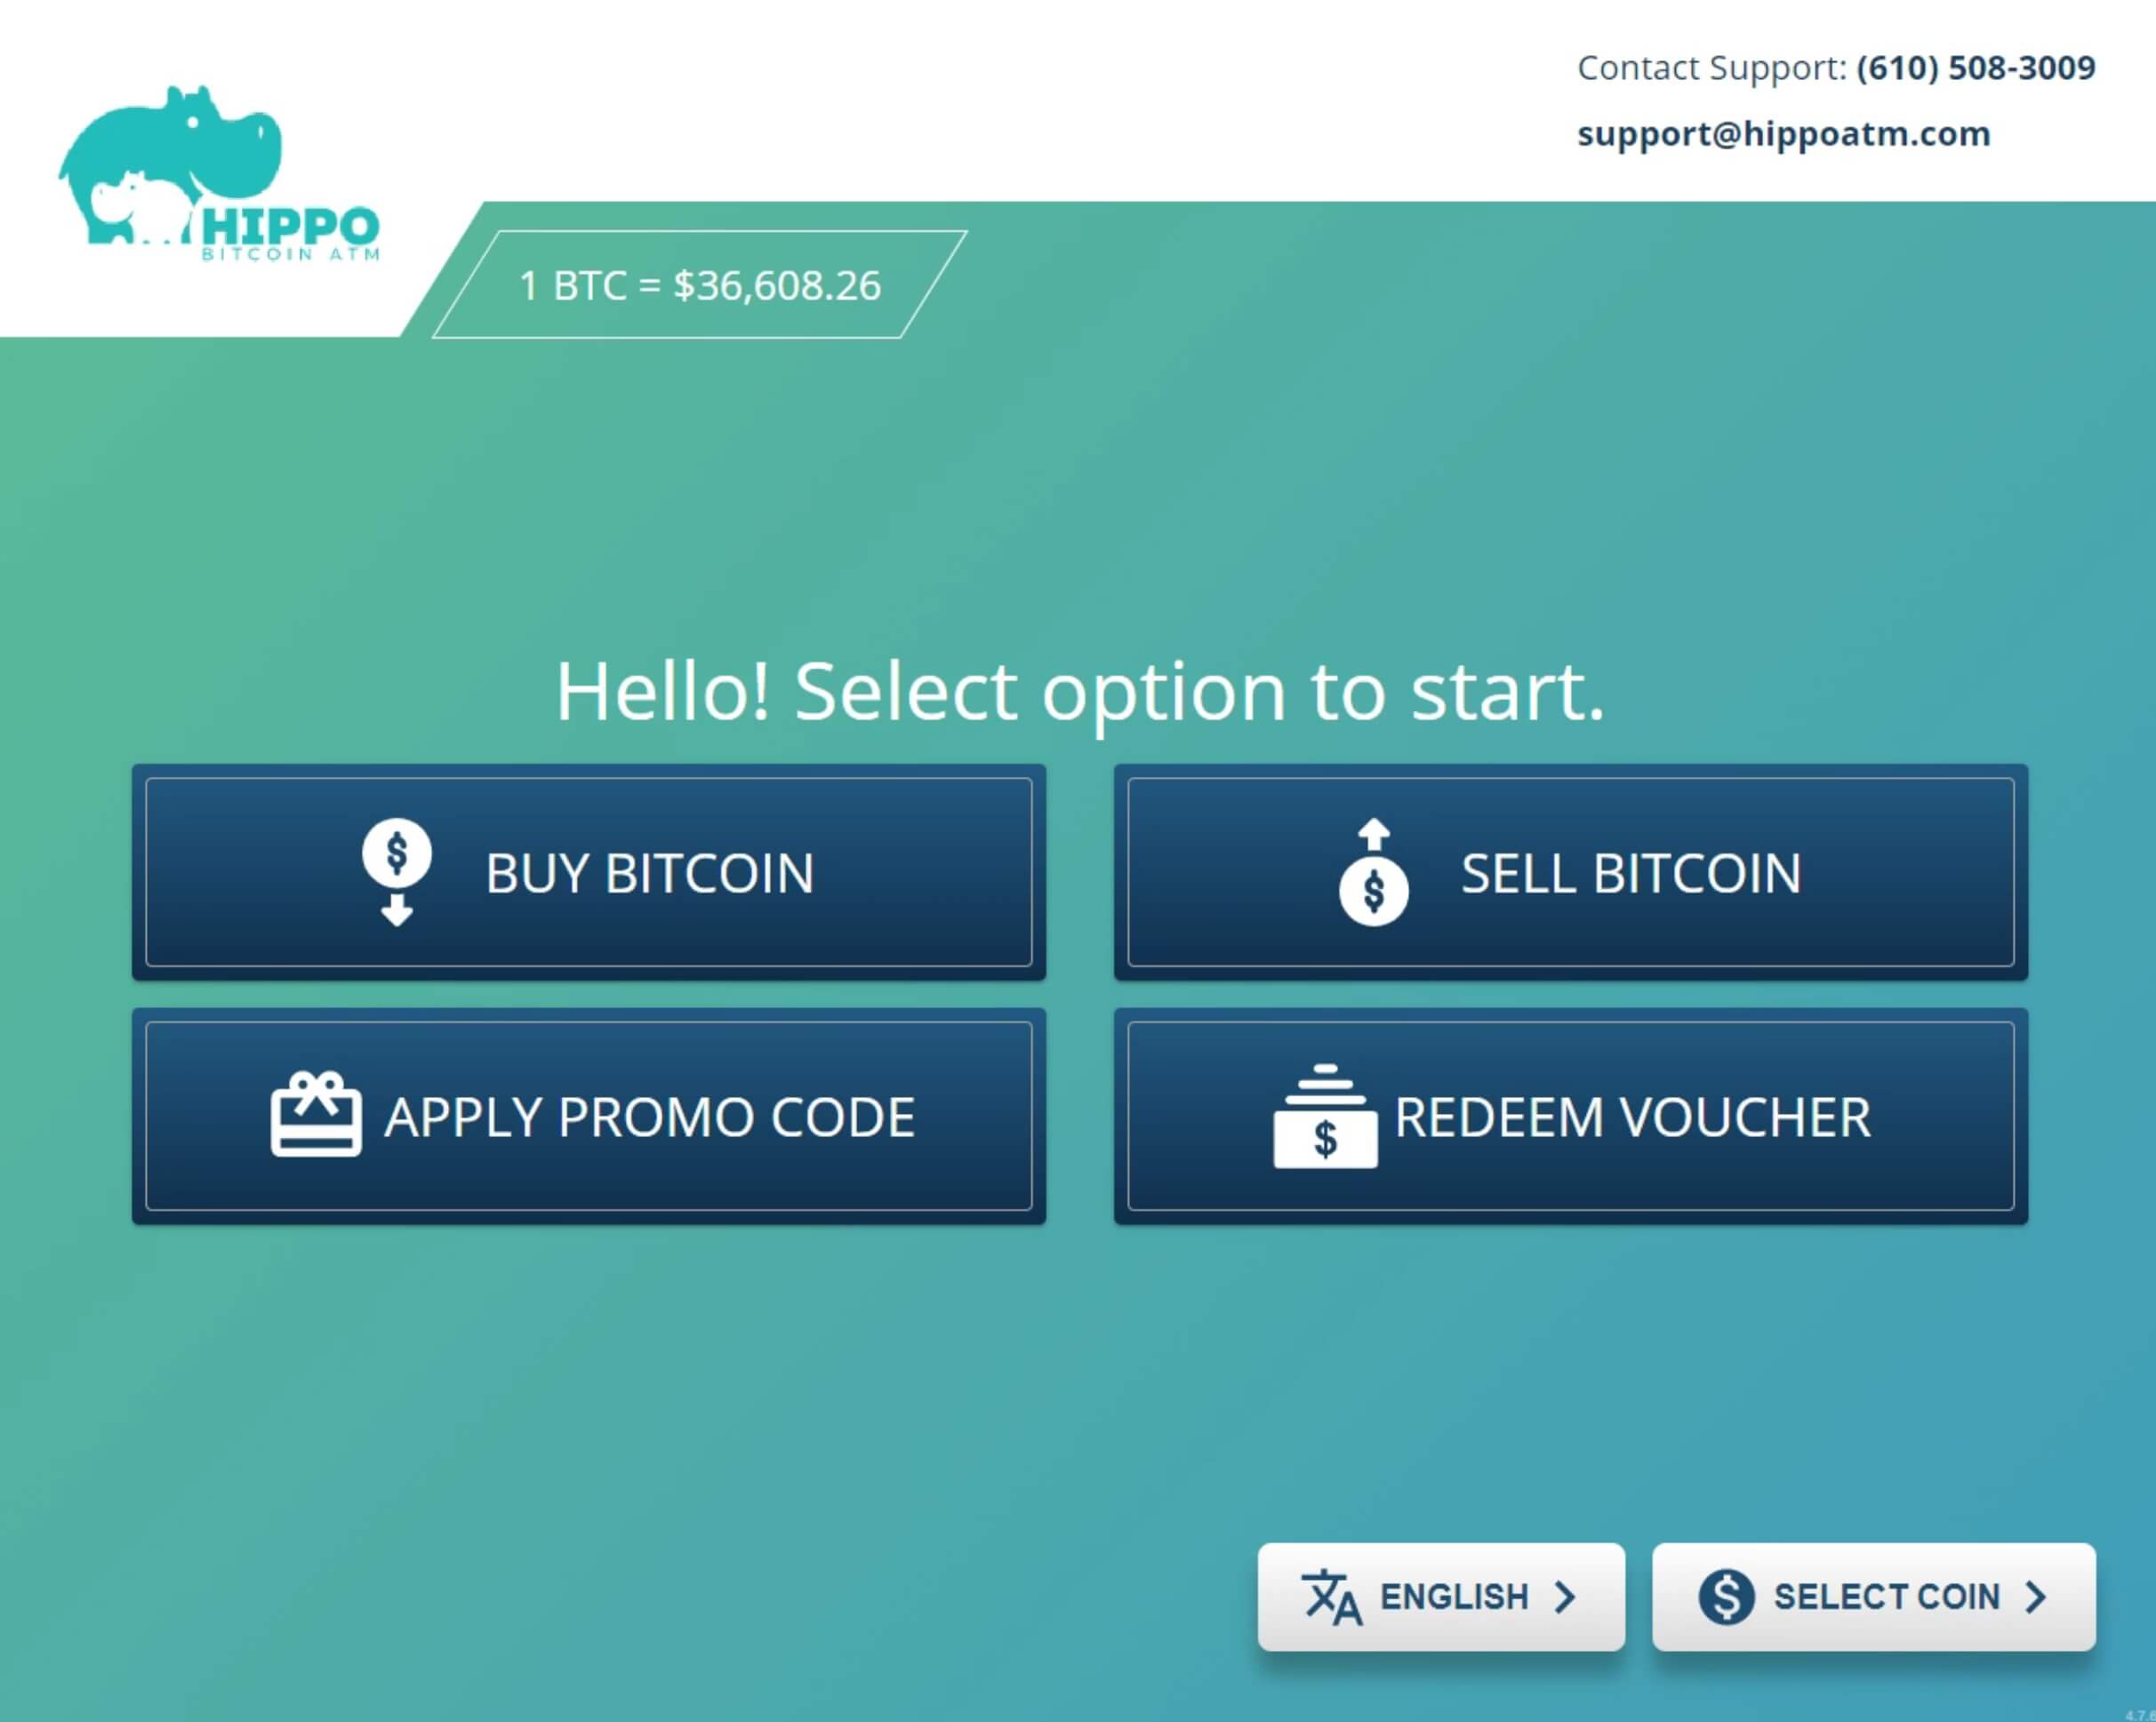 ChainBytes Bitcoin ATM Software operated by Hippo Bitcoin ATM